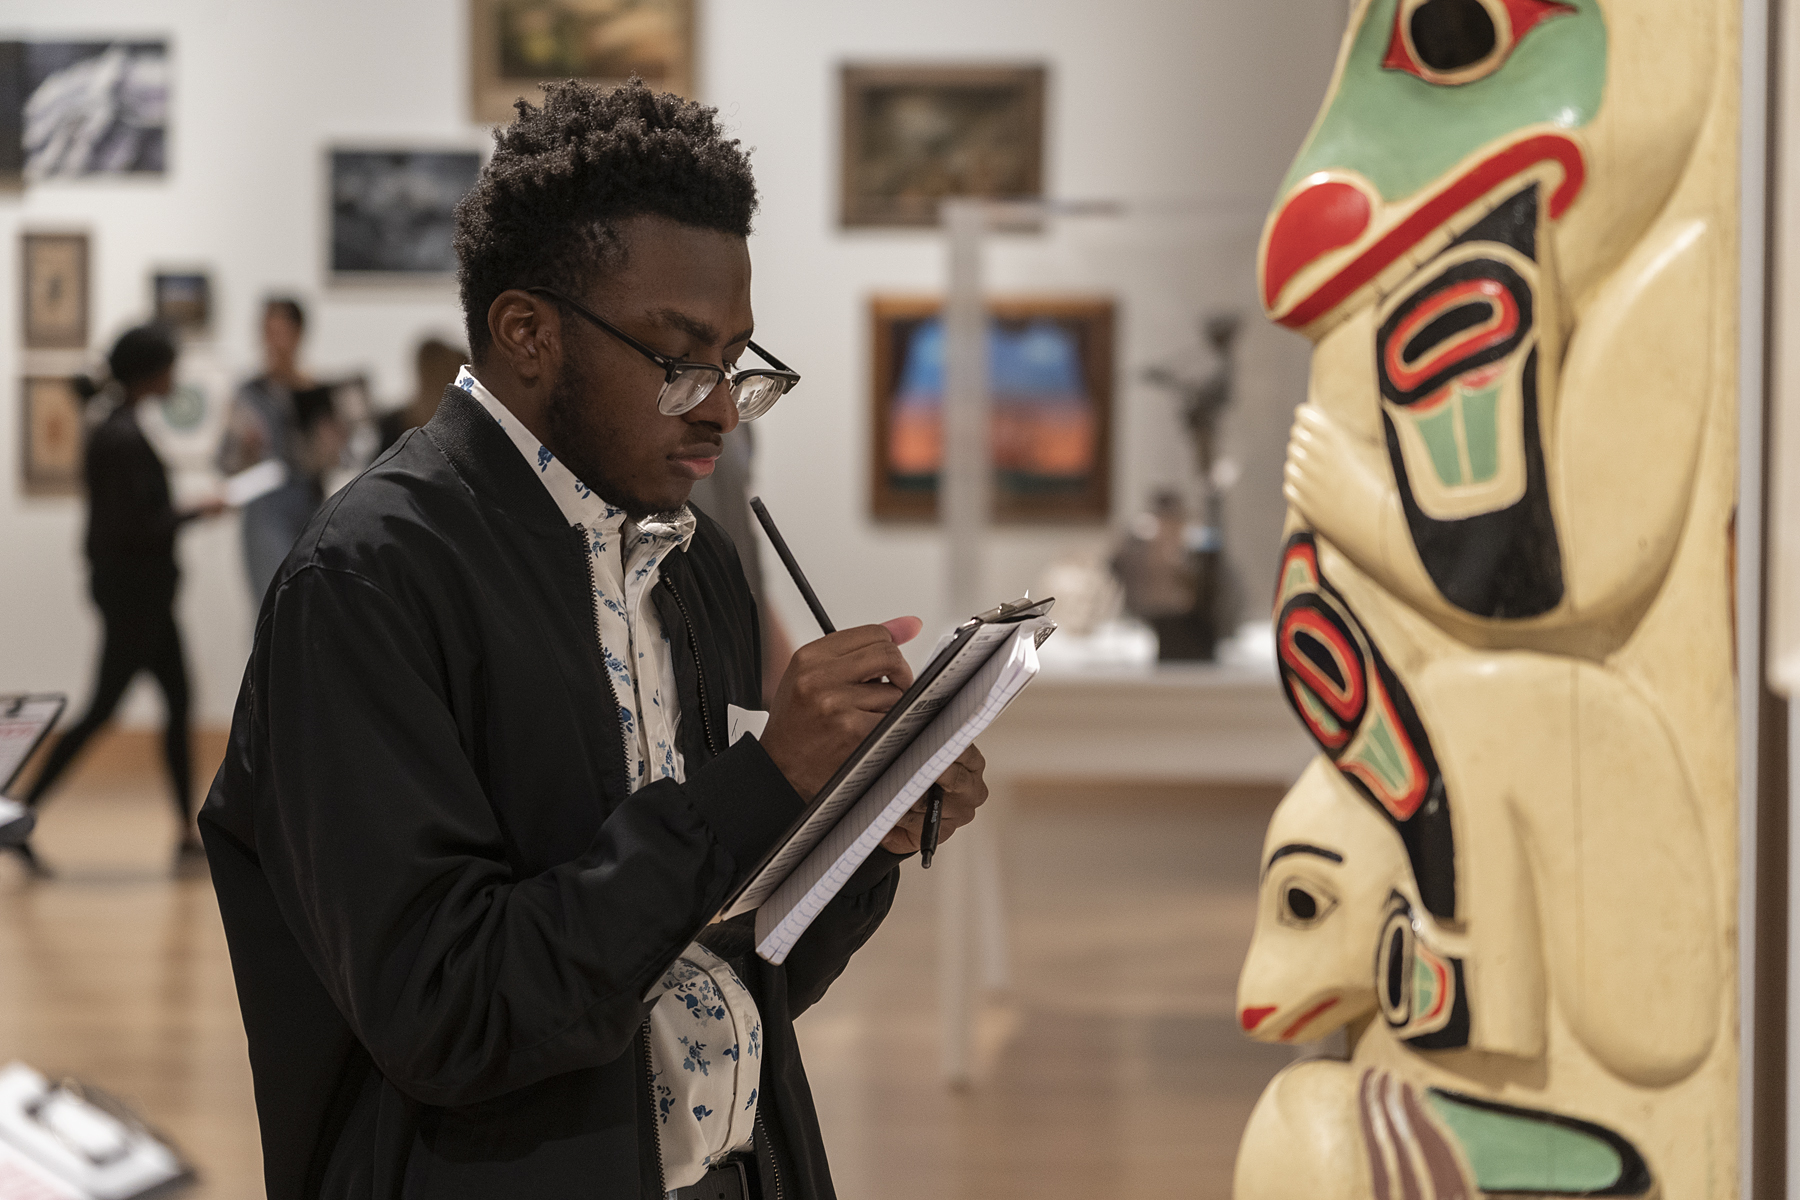 A student with glasses holds a clipboard and takes notes while standing in front of a totem pole